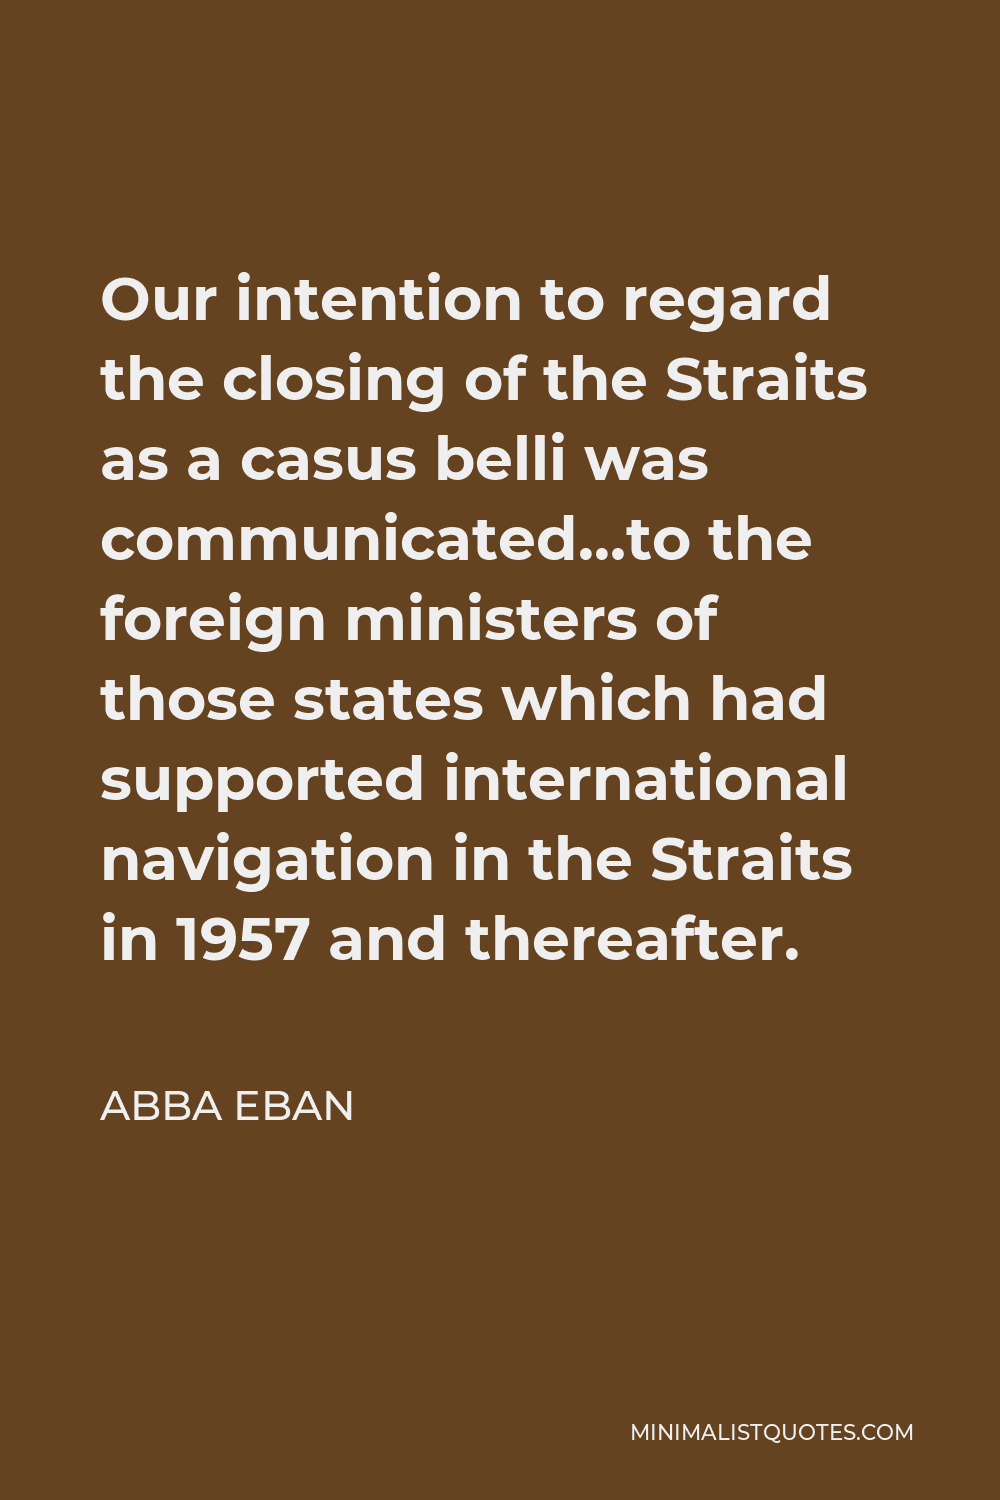 Abba Eban Quote - Our intention to regard the closing of the Straits as a casus belli was communicated…to the foreign ministers of those states which had supported international navigation in the Straits in 1957 and thereafter.